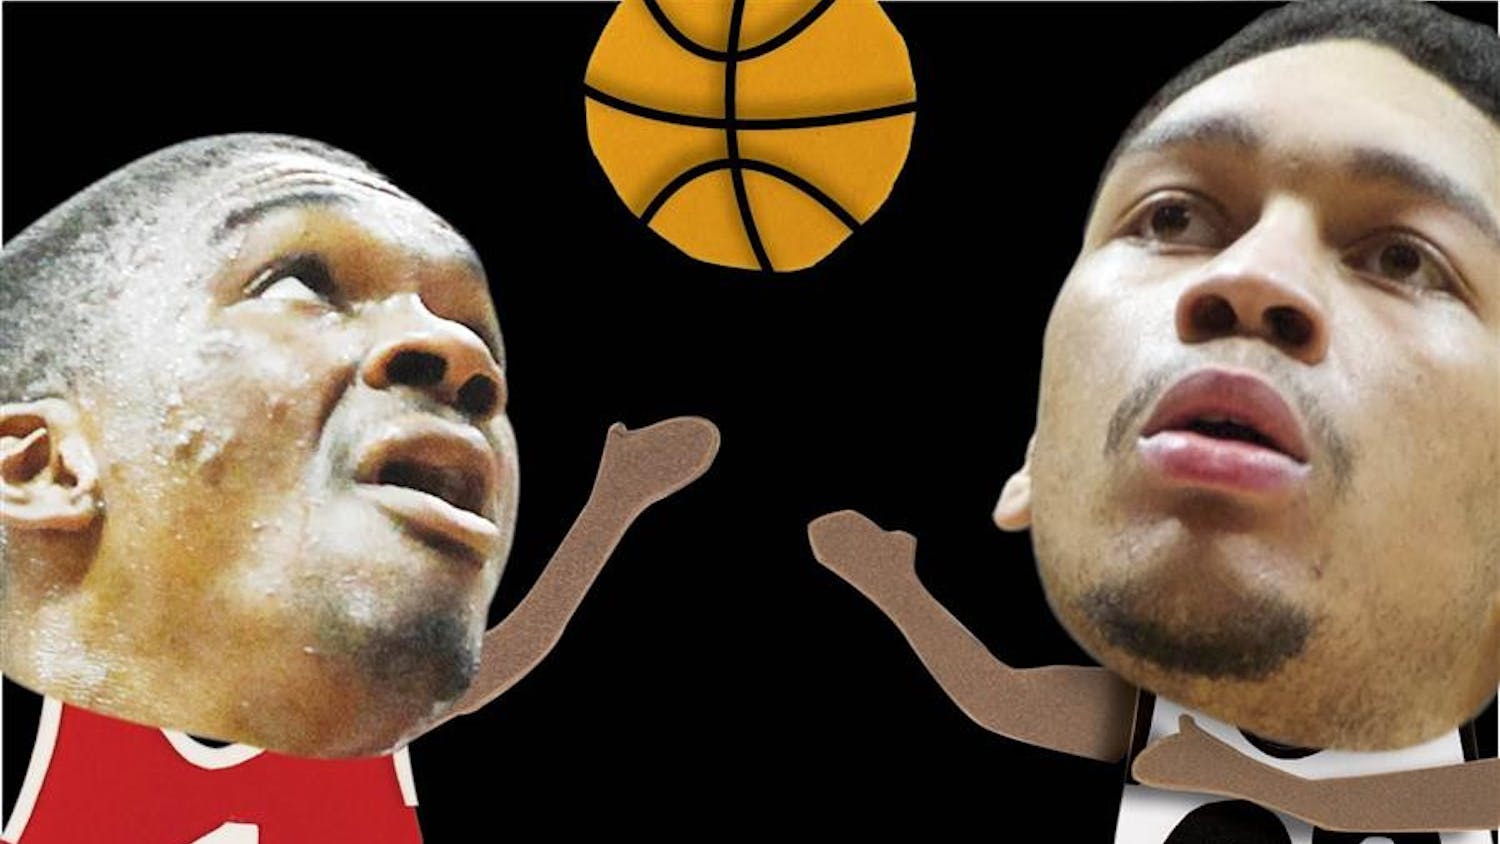 Battle of the big heads